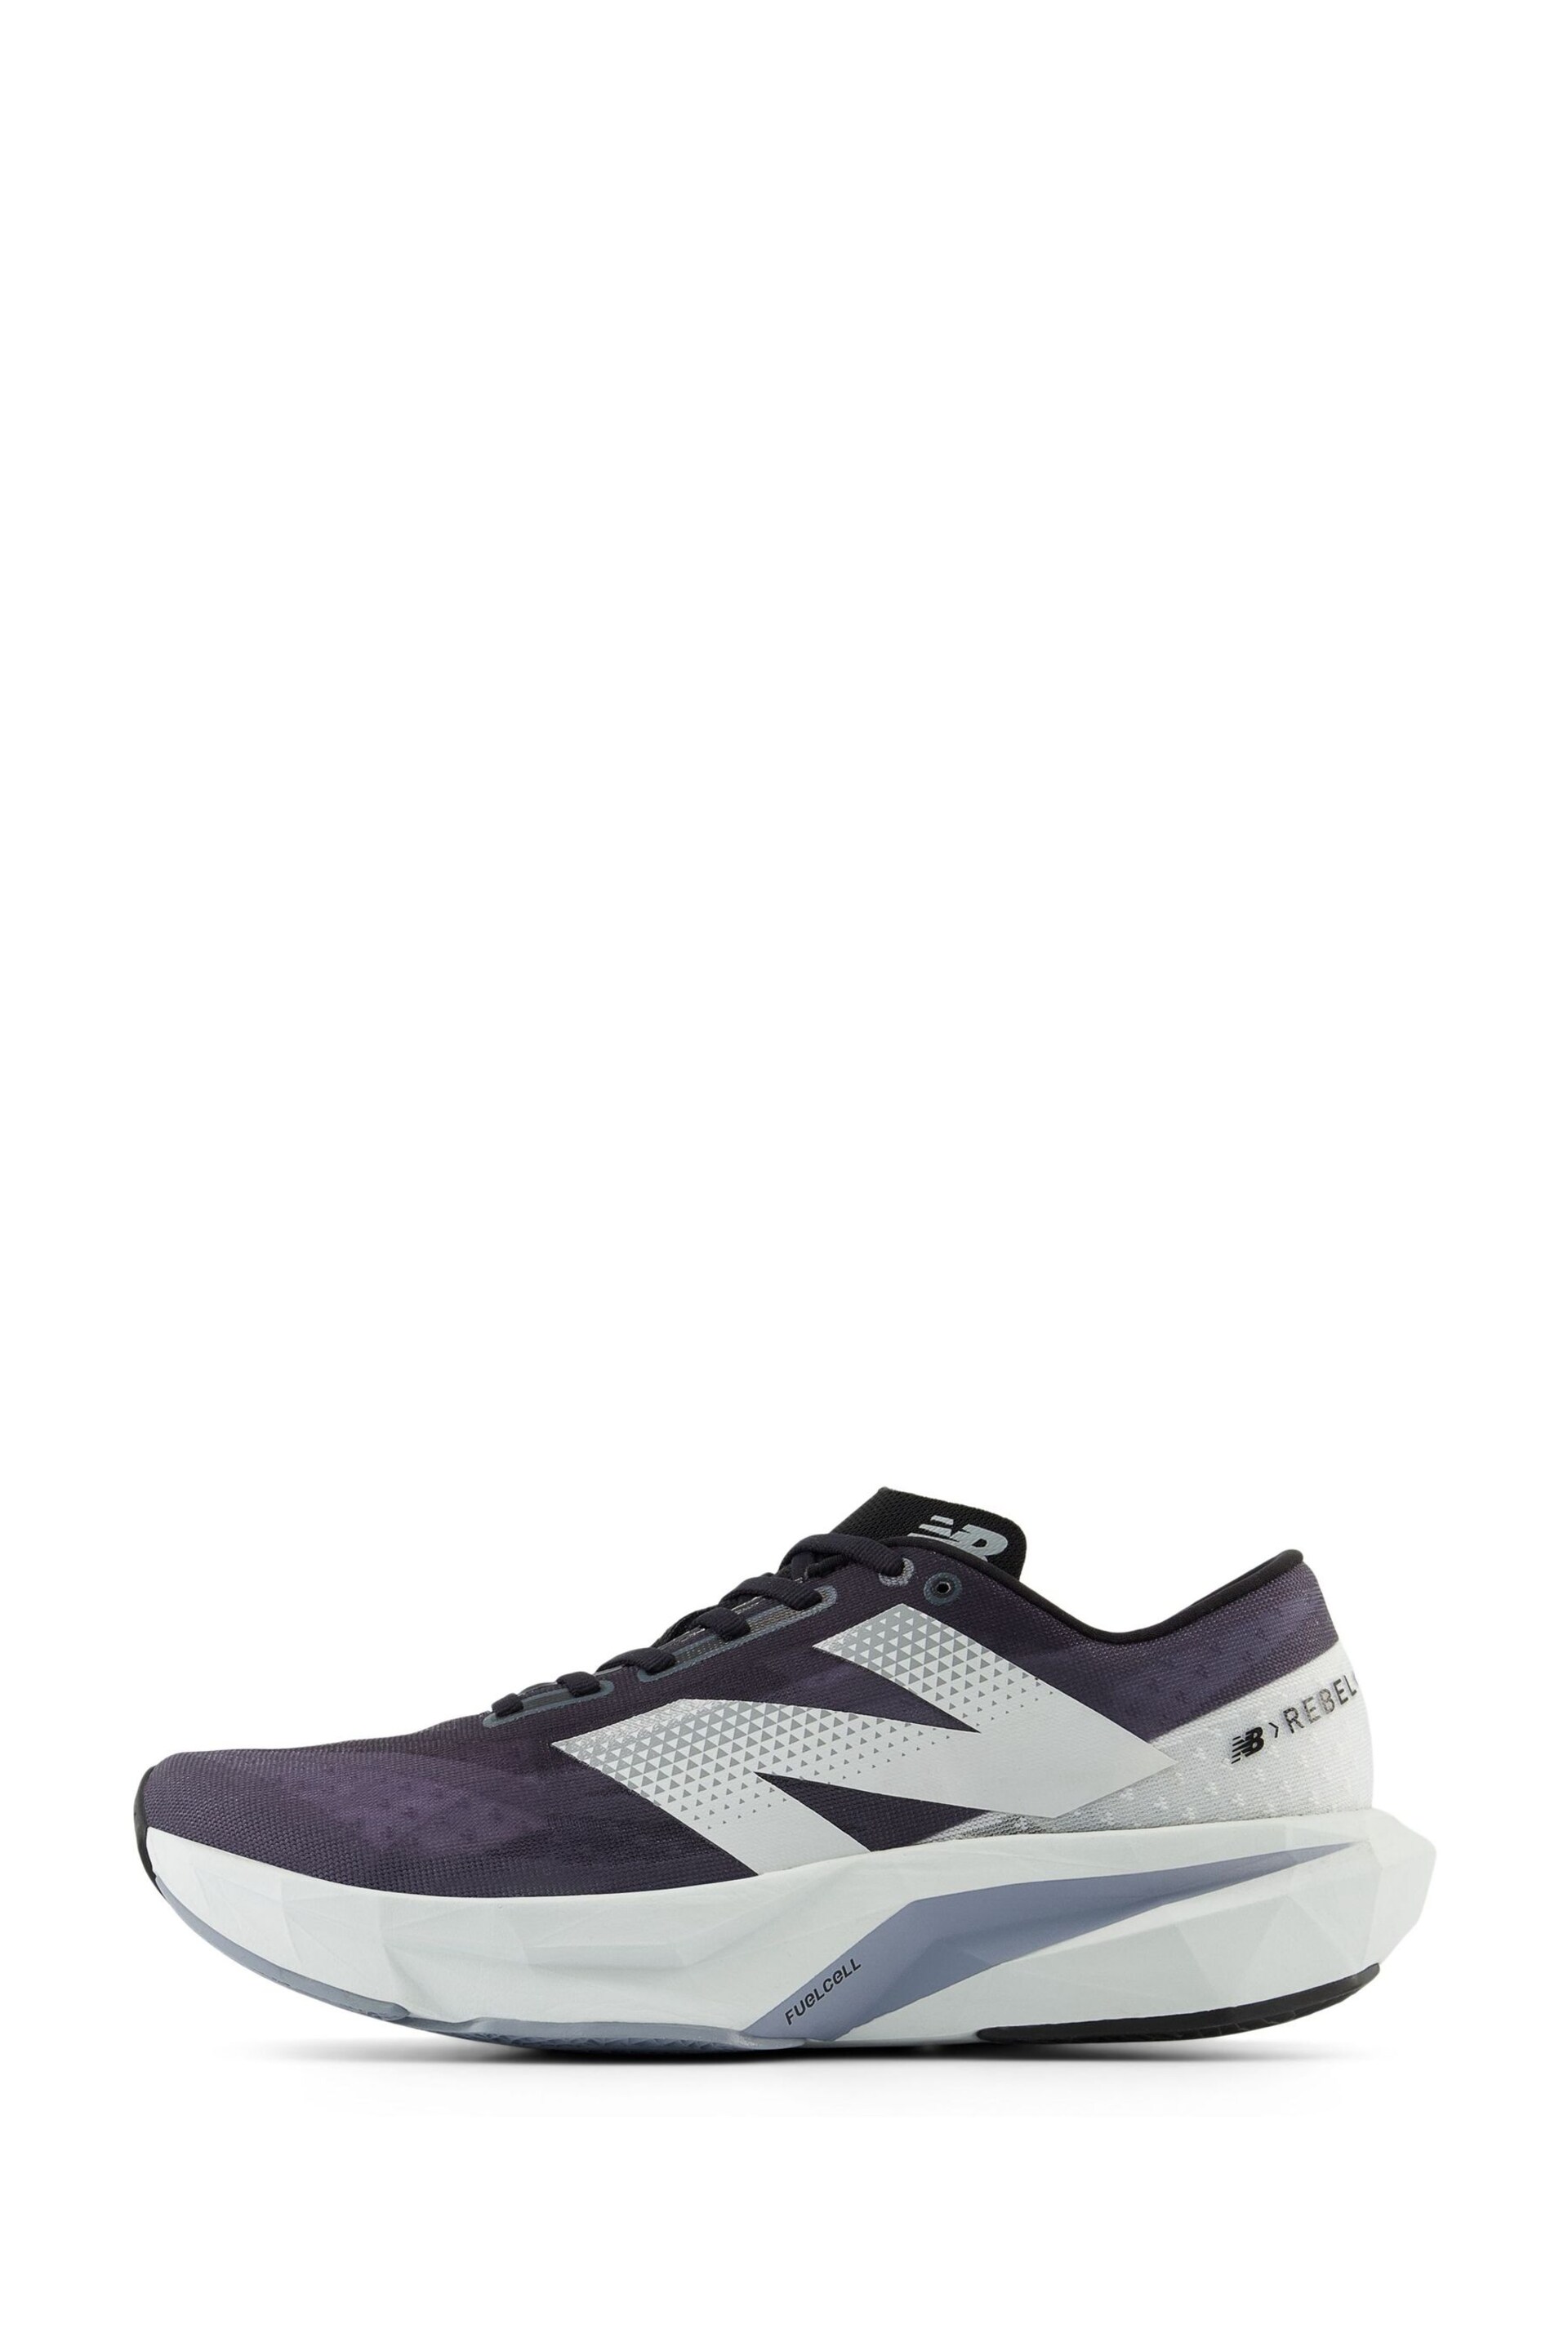 New Balance Grey Mens Fuelcell Rebel Trainers - Image 2 of 12